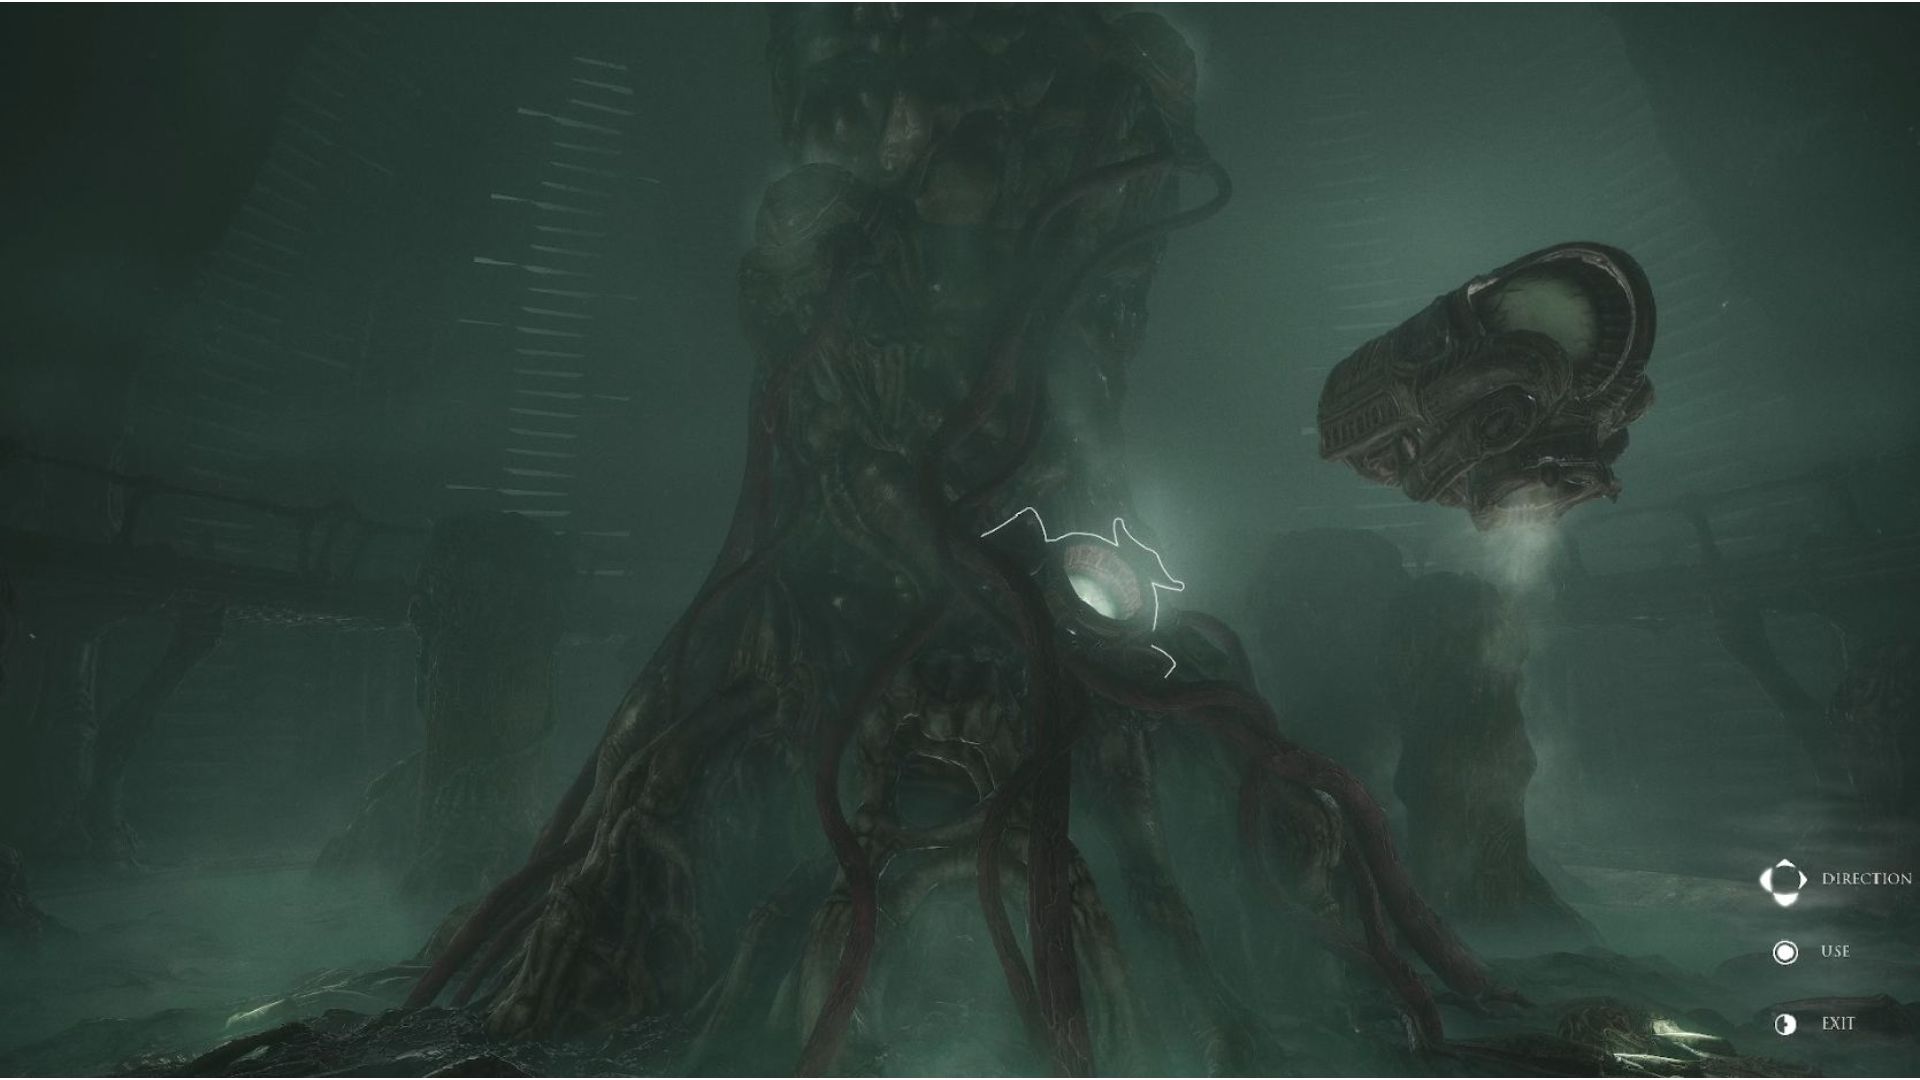 Scorn Puzzle Solutions: The large tower with the pods can be seen